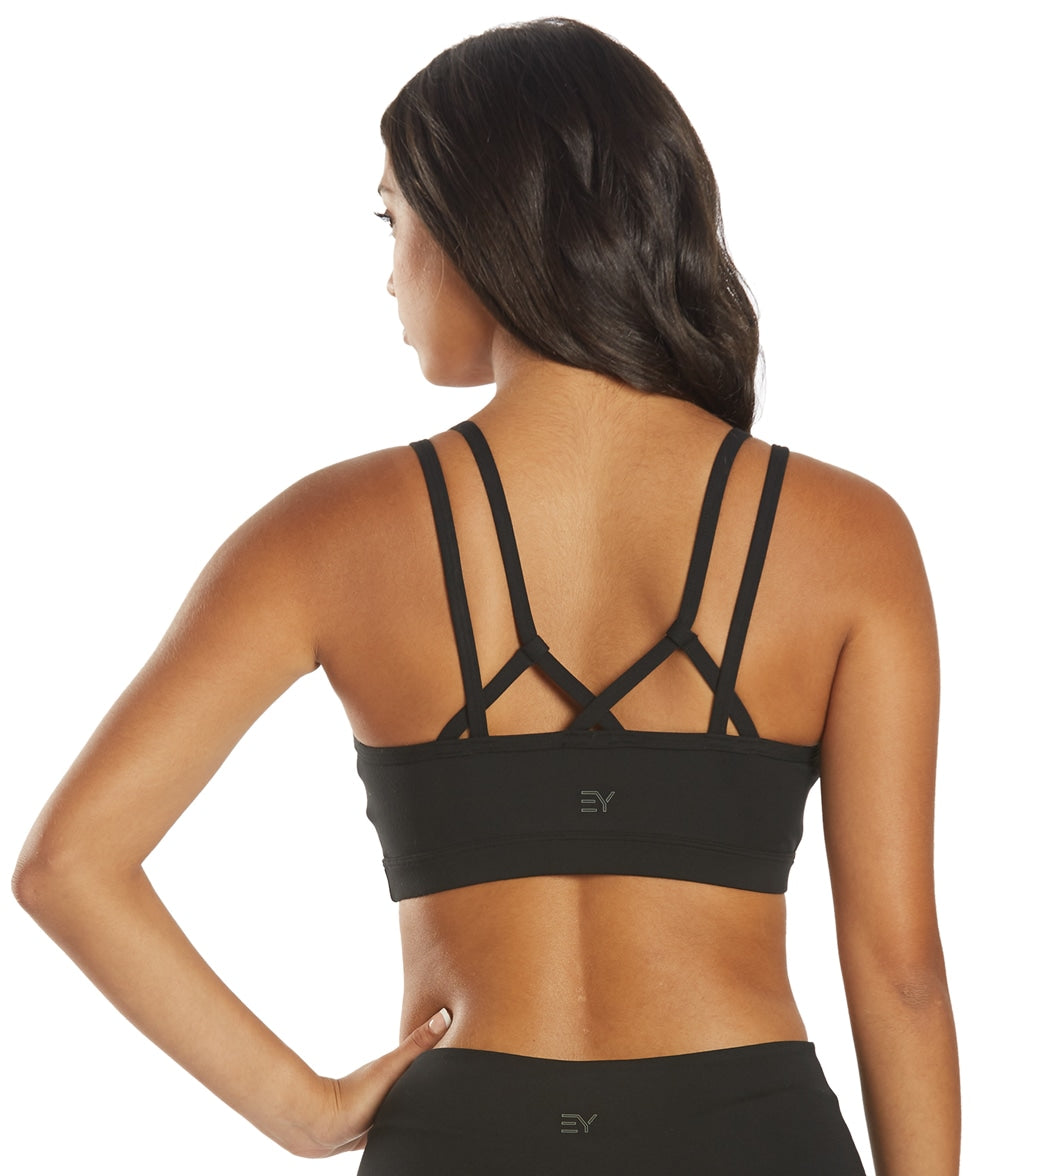 Everyday Yoga Wholesome Solid Sports Bra